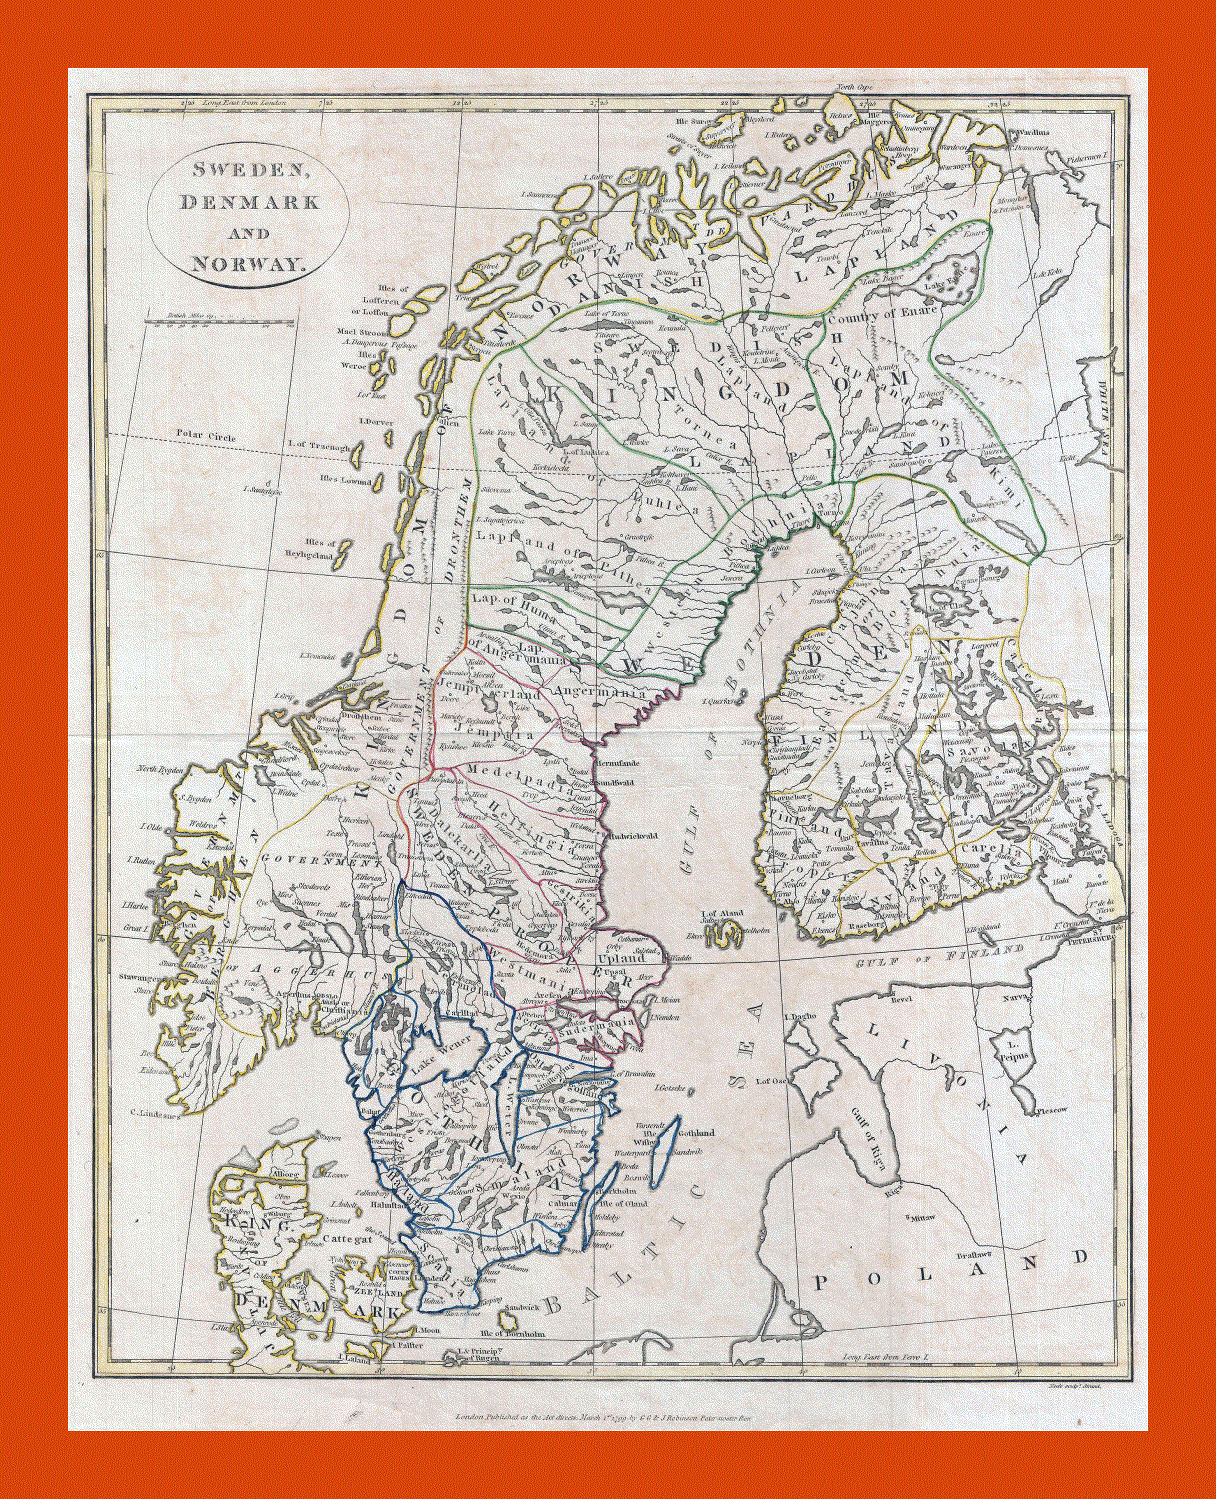 Old political map of Sweden, Denmark and Norway - 1799